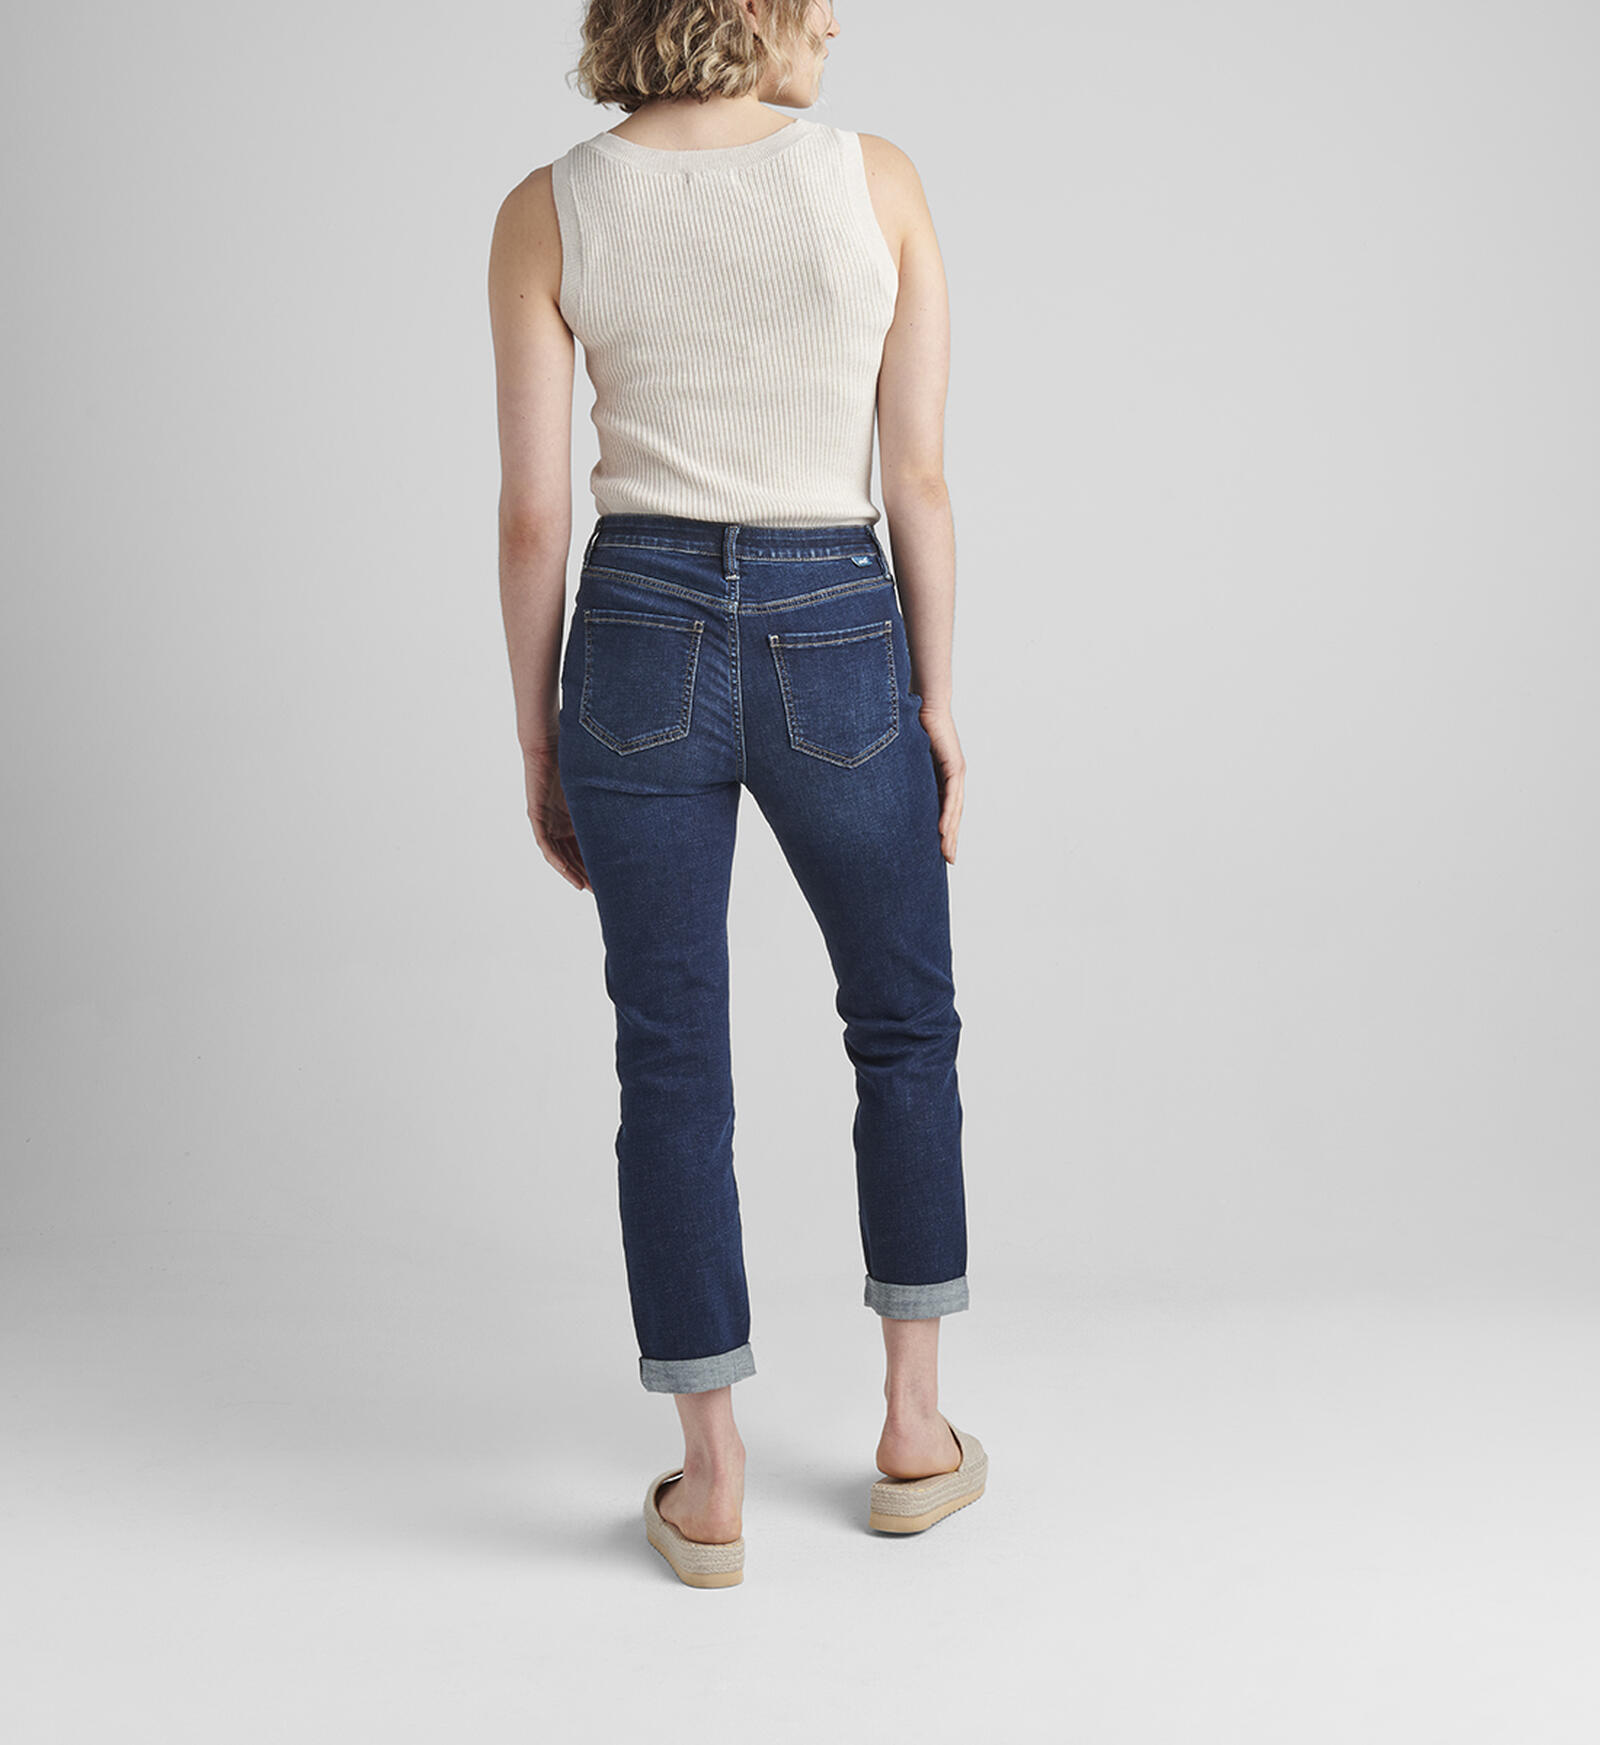 Buy Carter Mid Rise Girlfriend Jeans Petite for USD  | Jag Jeans US New